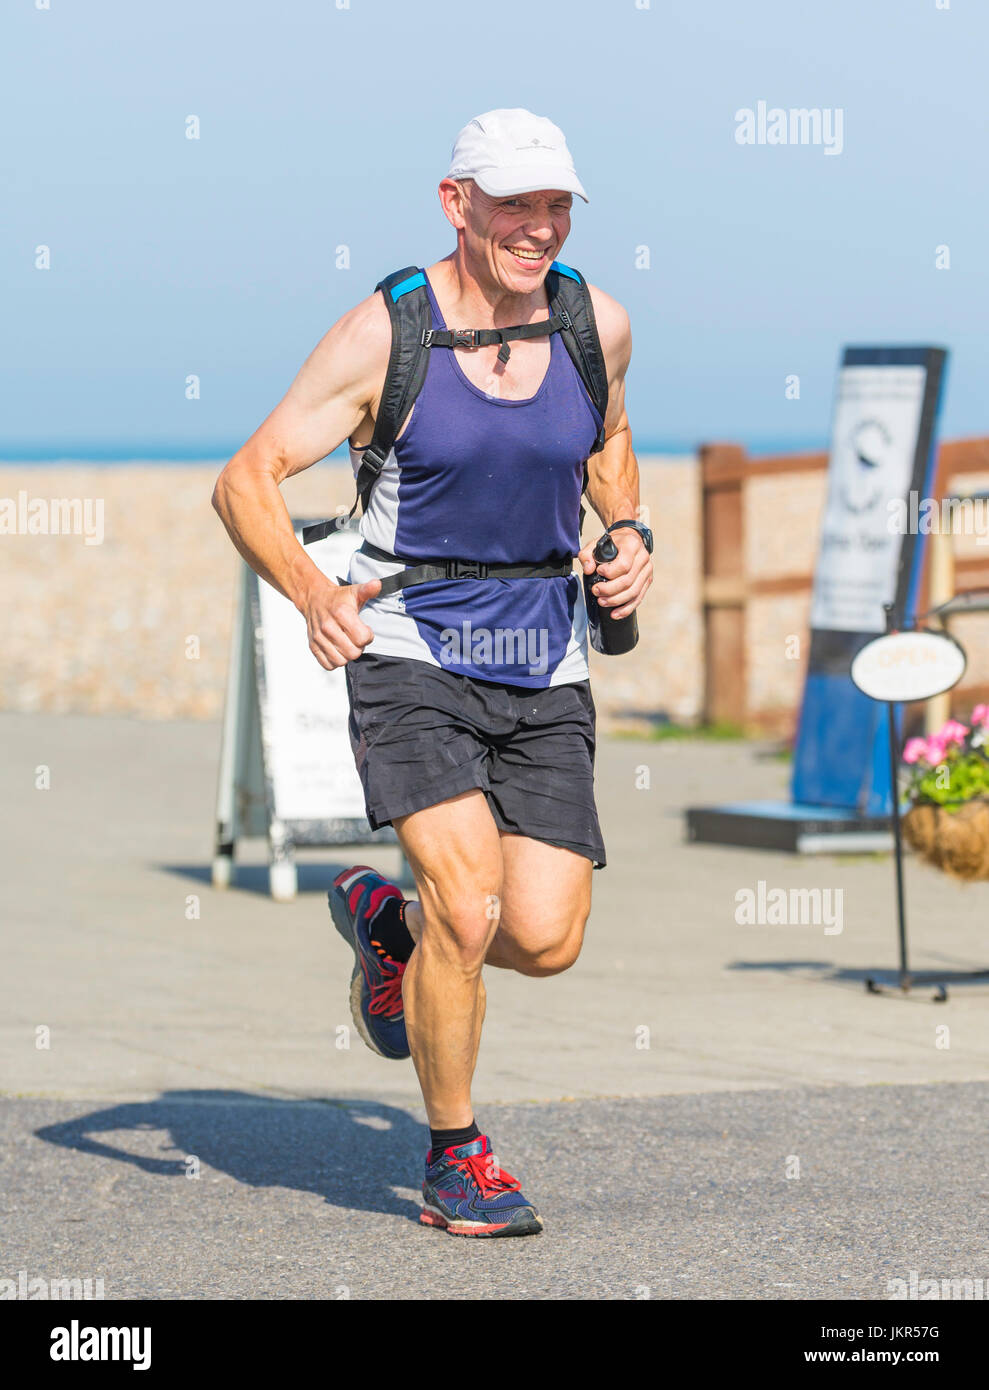 Man jogging and smiling on a seafront promenade. Stock Photo